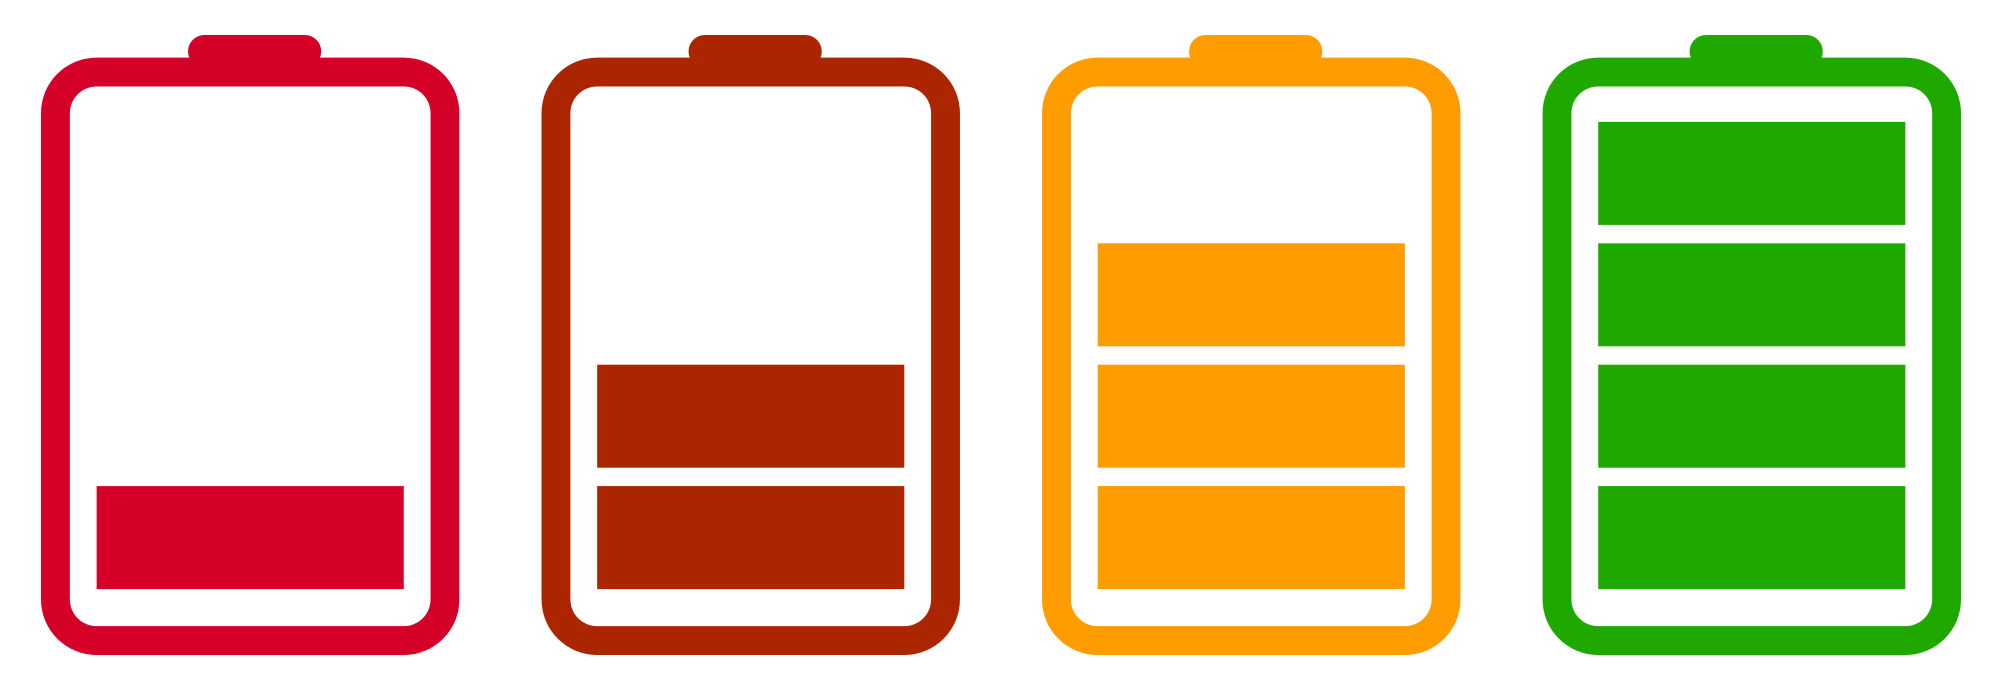 Battery Icon image #34300